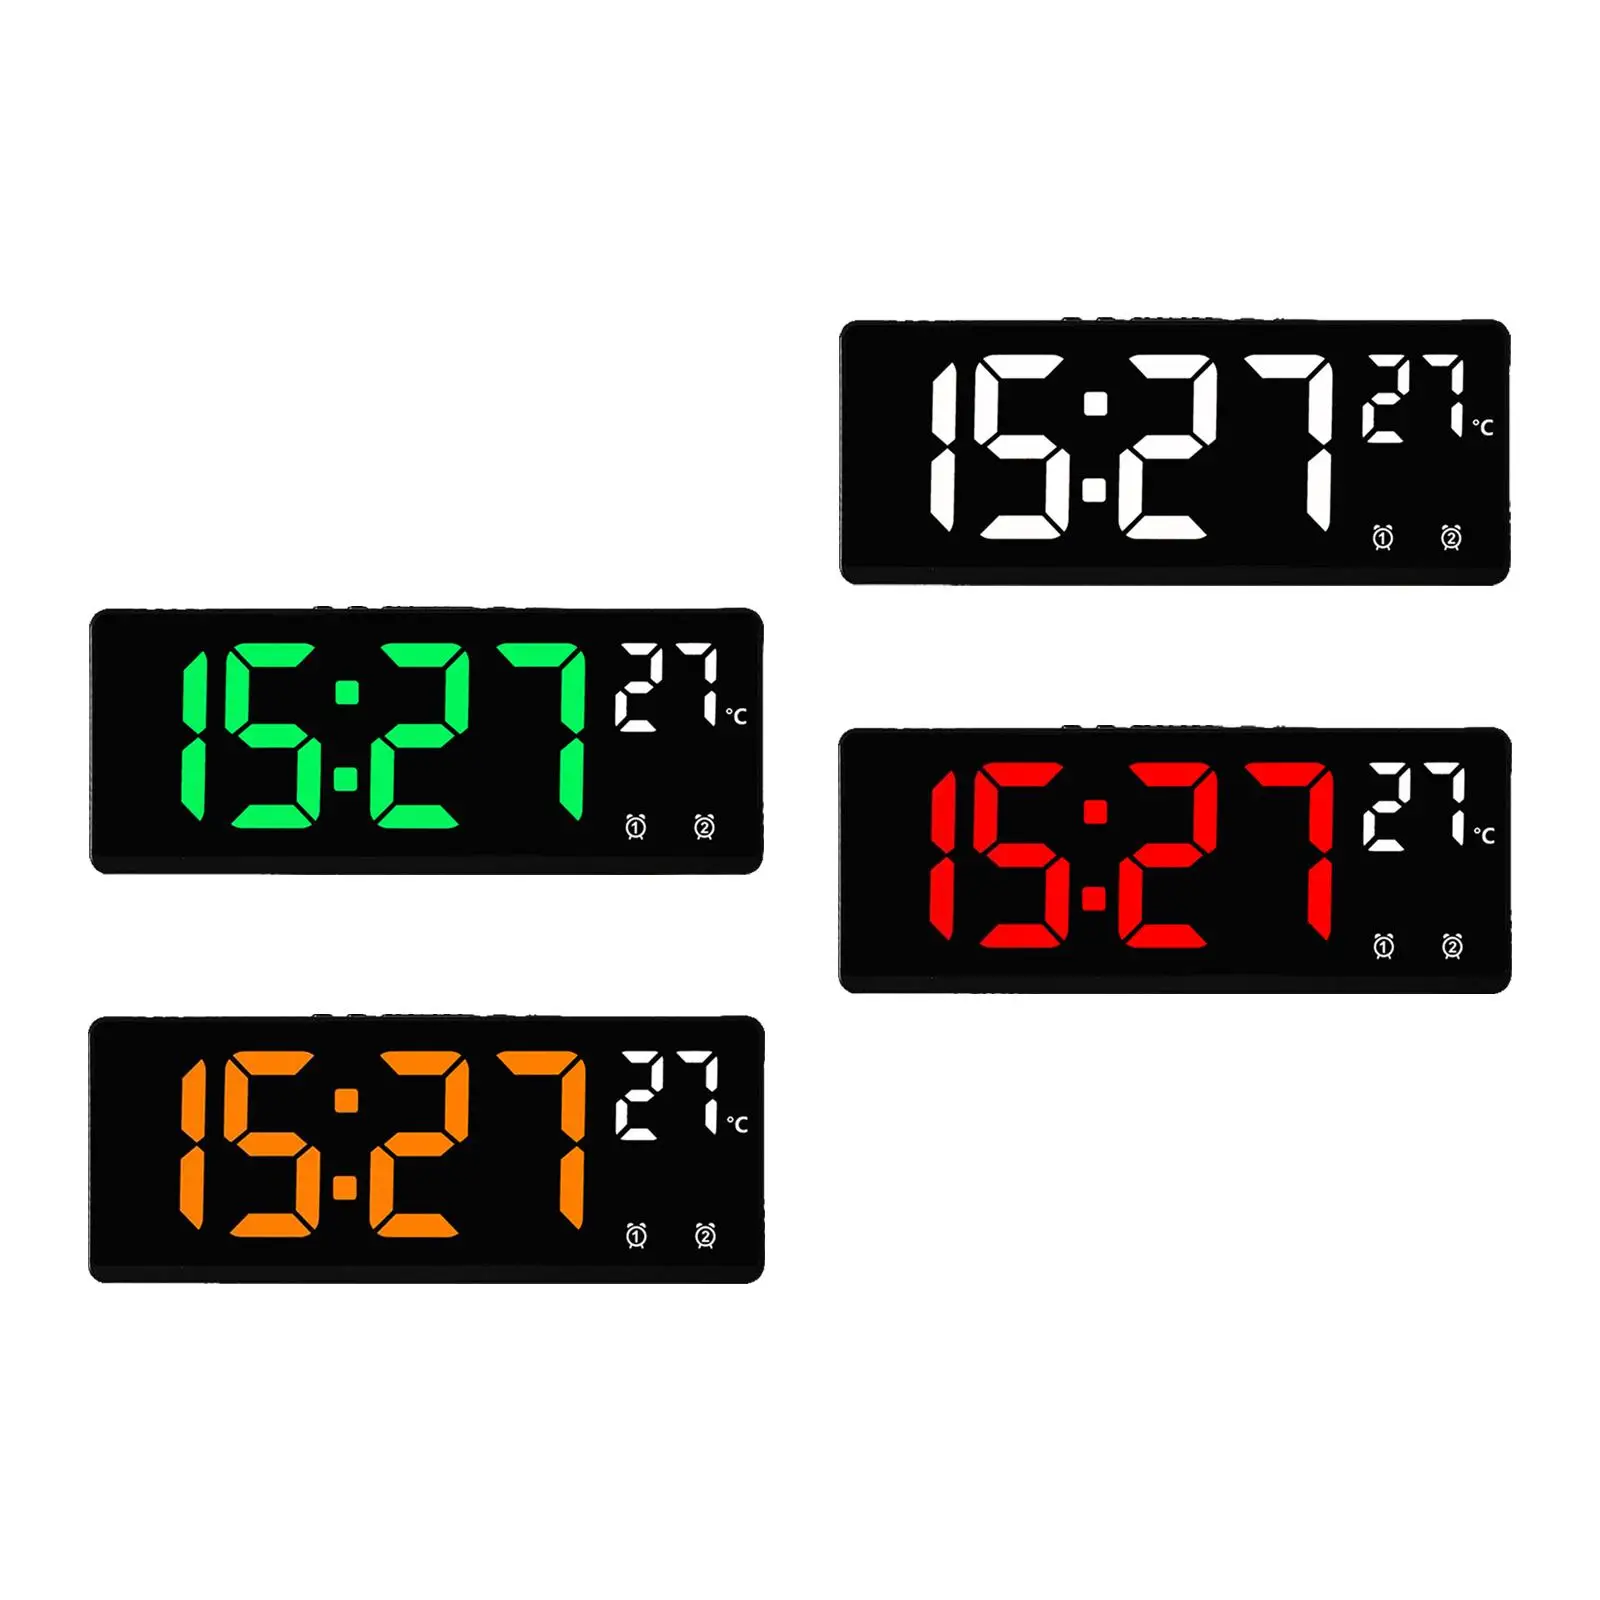 Digital Alarm Clock Dimmable Electronic Clock Large Display for Desk Travel